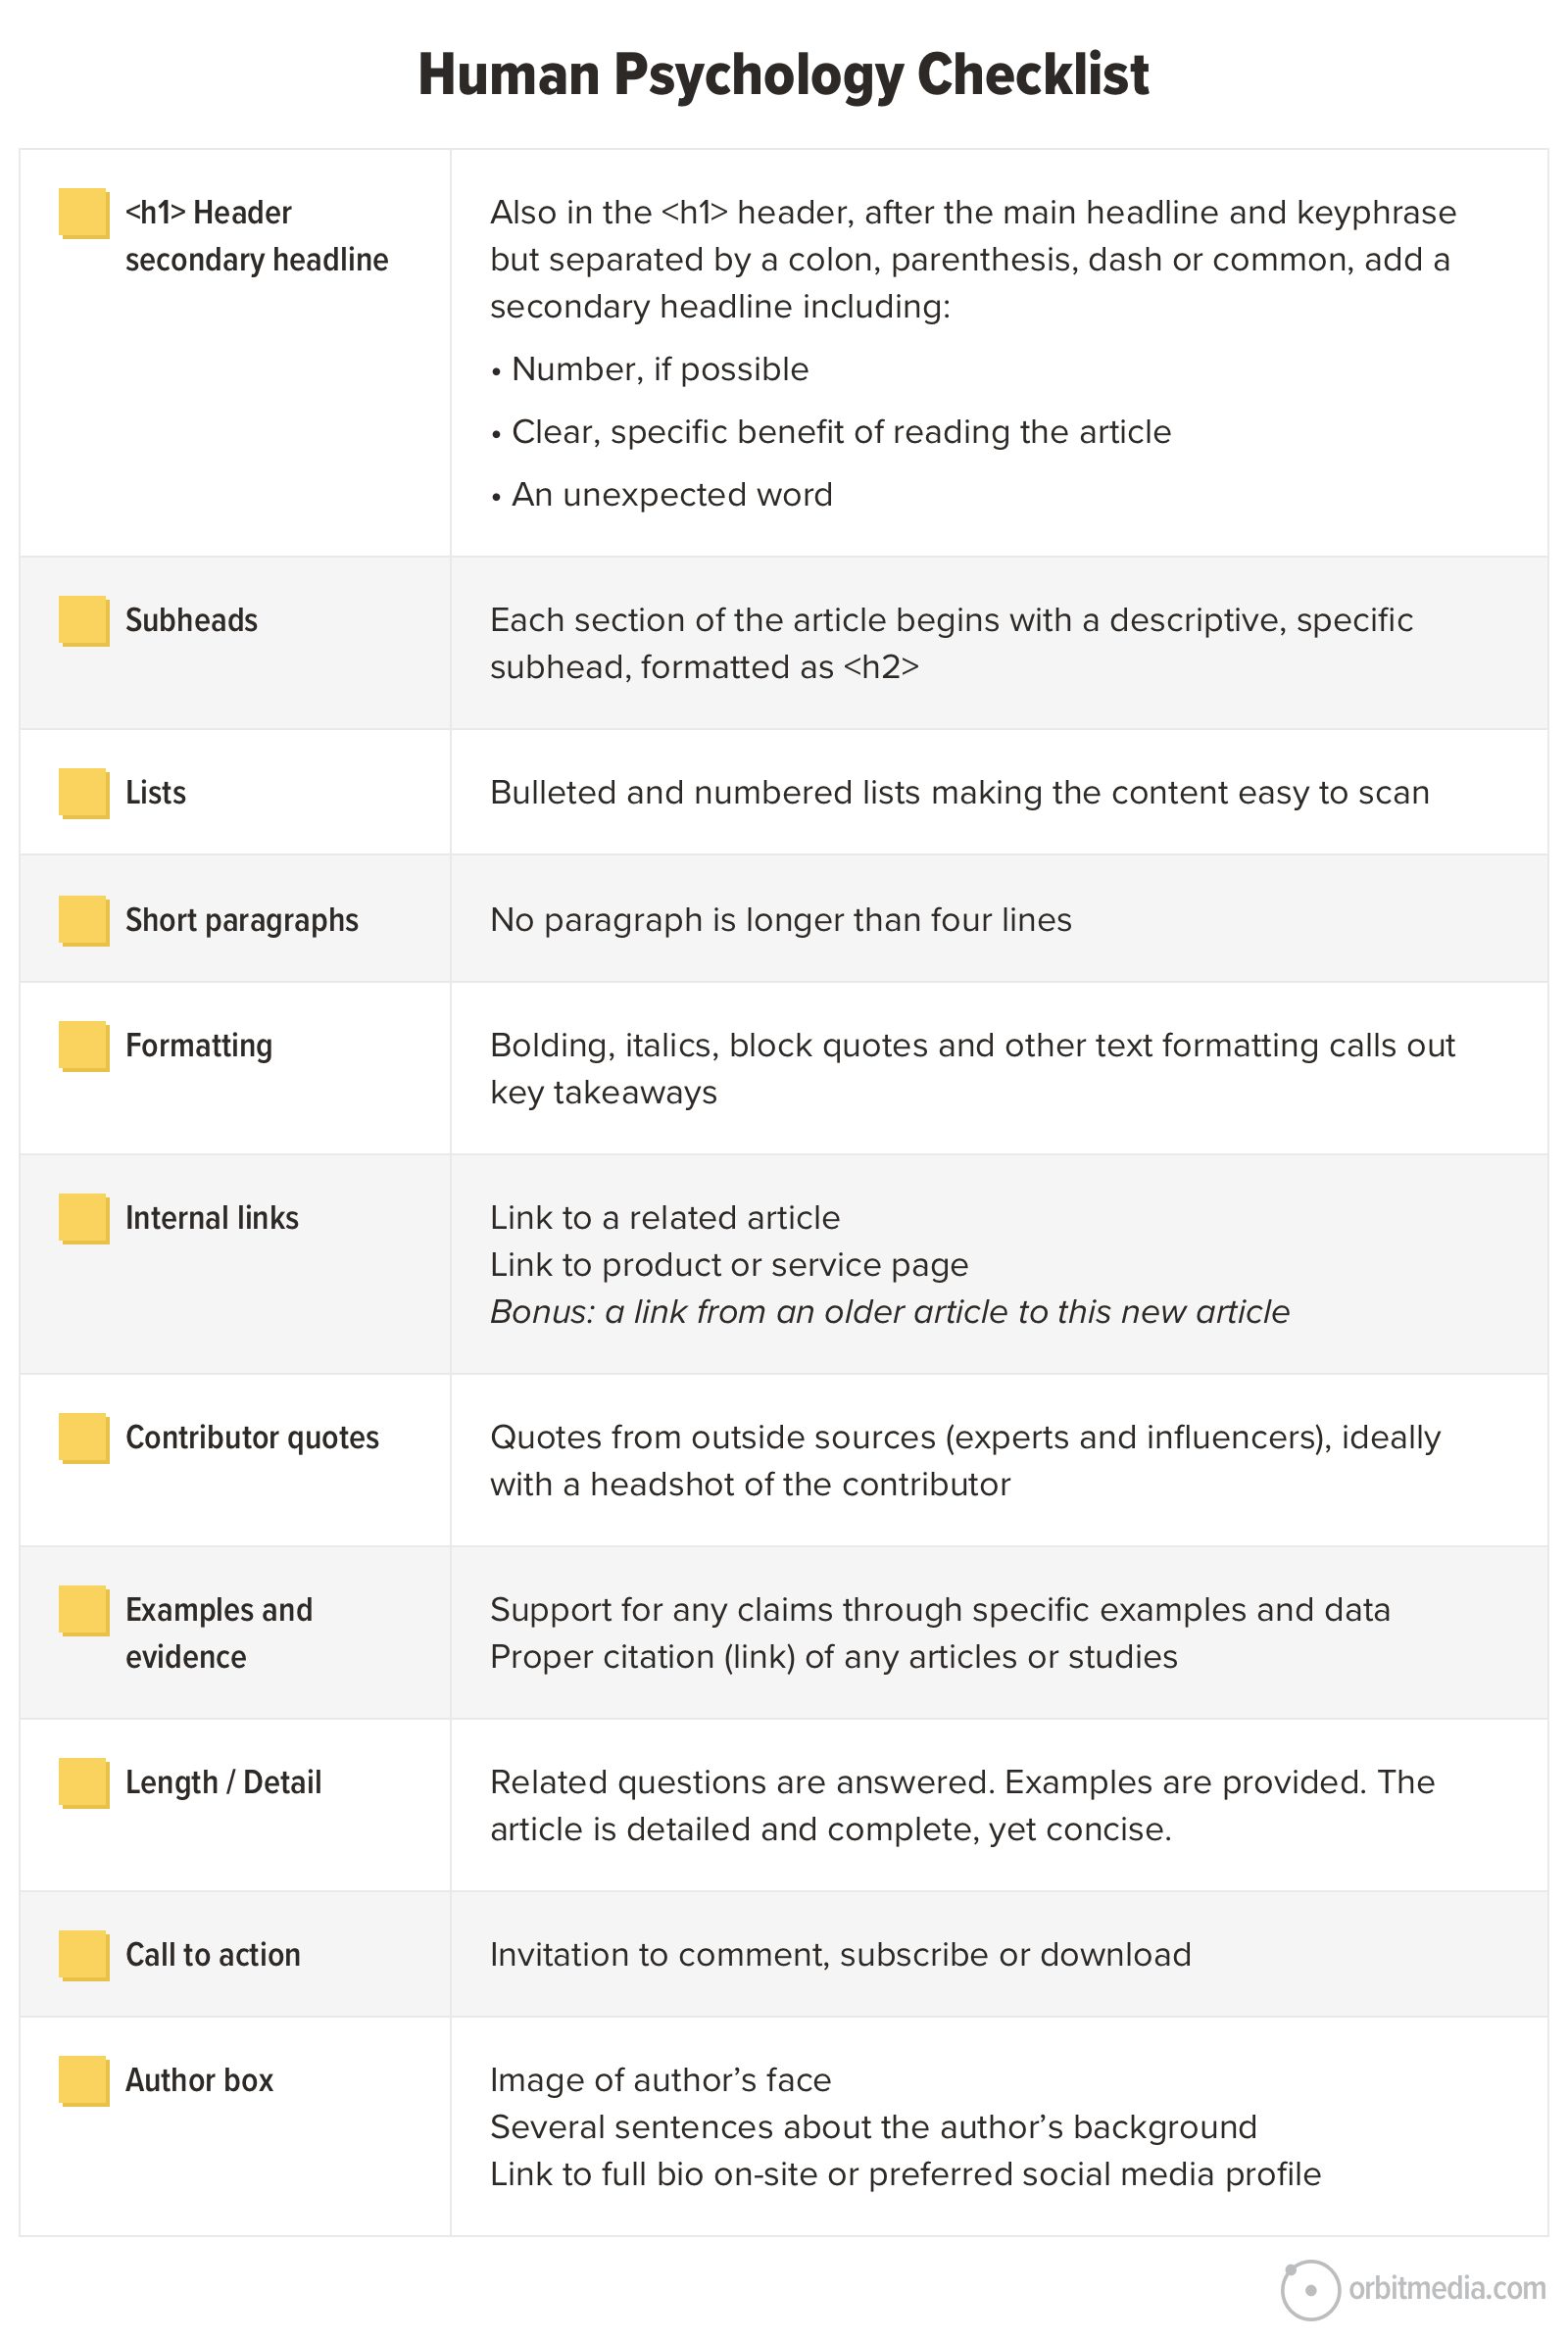 A checklist detailing various components of a well-structured article, including headings, bullet points, links, quotes, and additional article-specific sections.